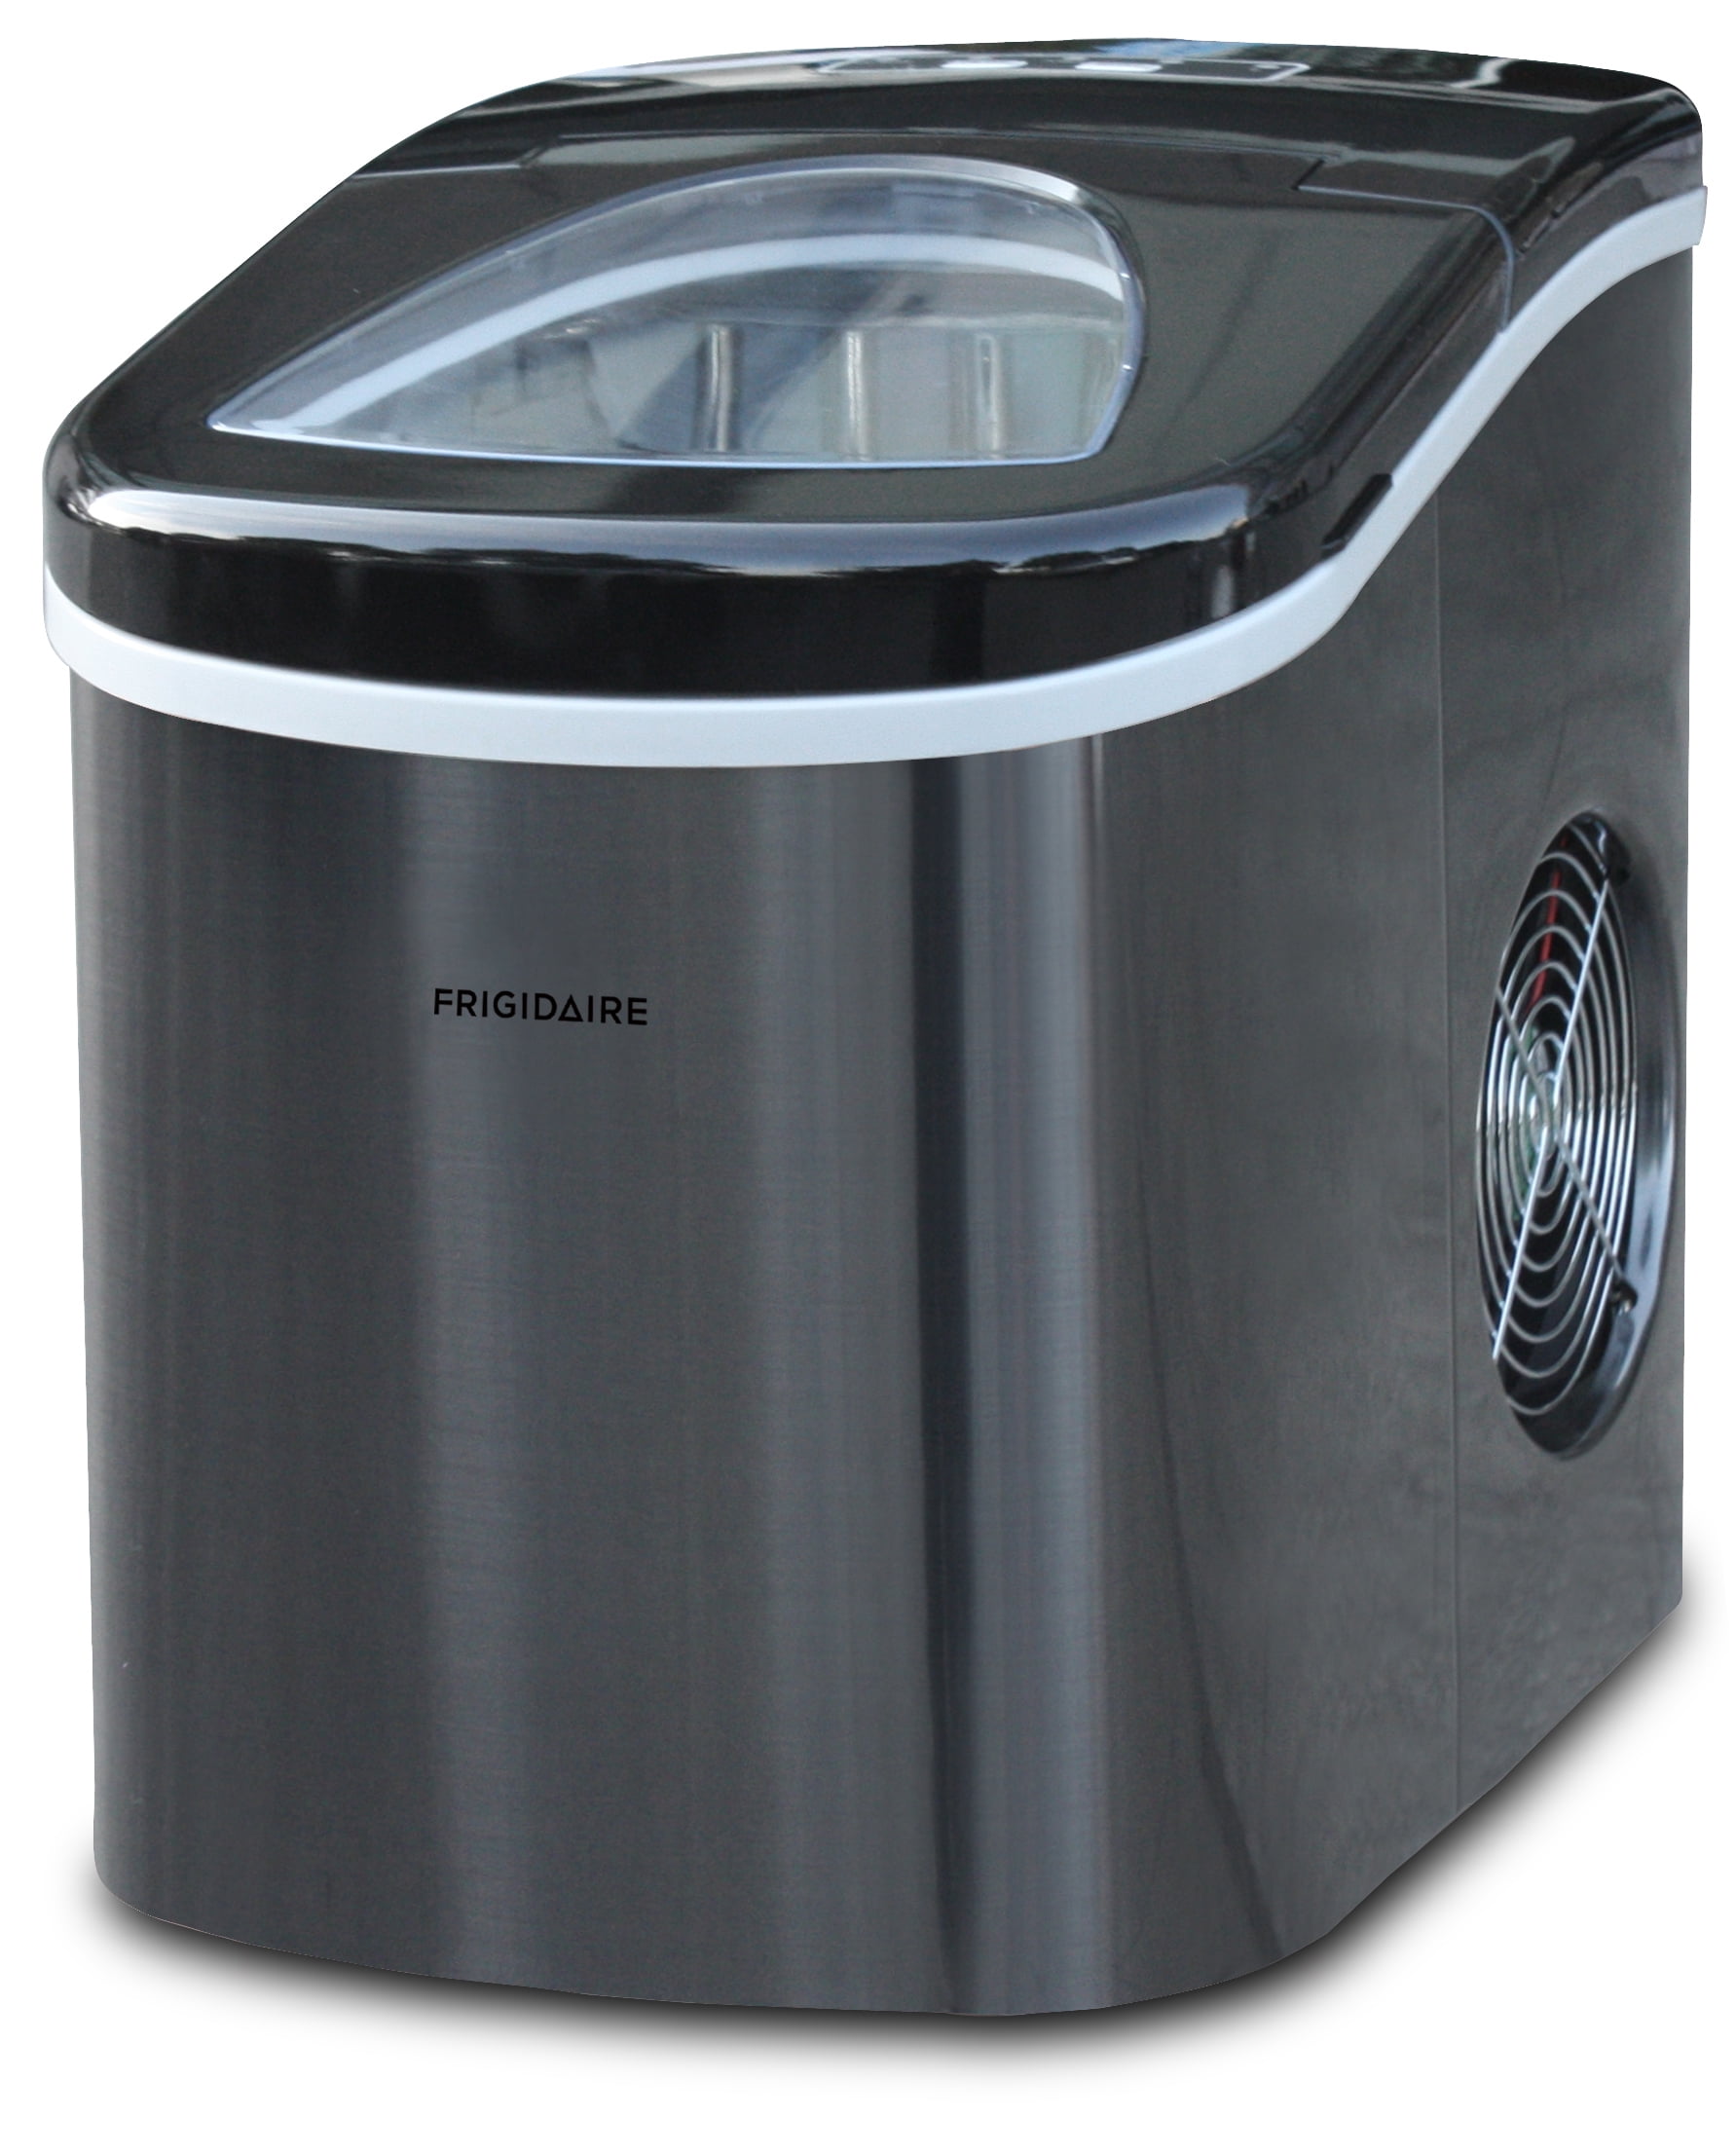 Frigidaire Countertop Stainless steel Ice Maker 26 lbs of Ice Per Day 